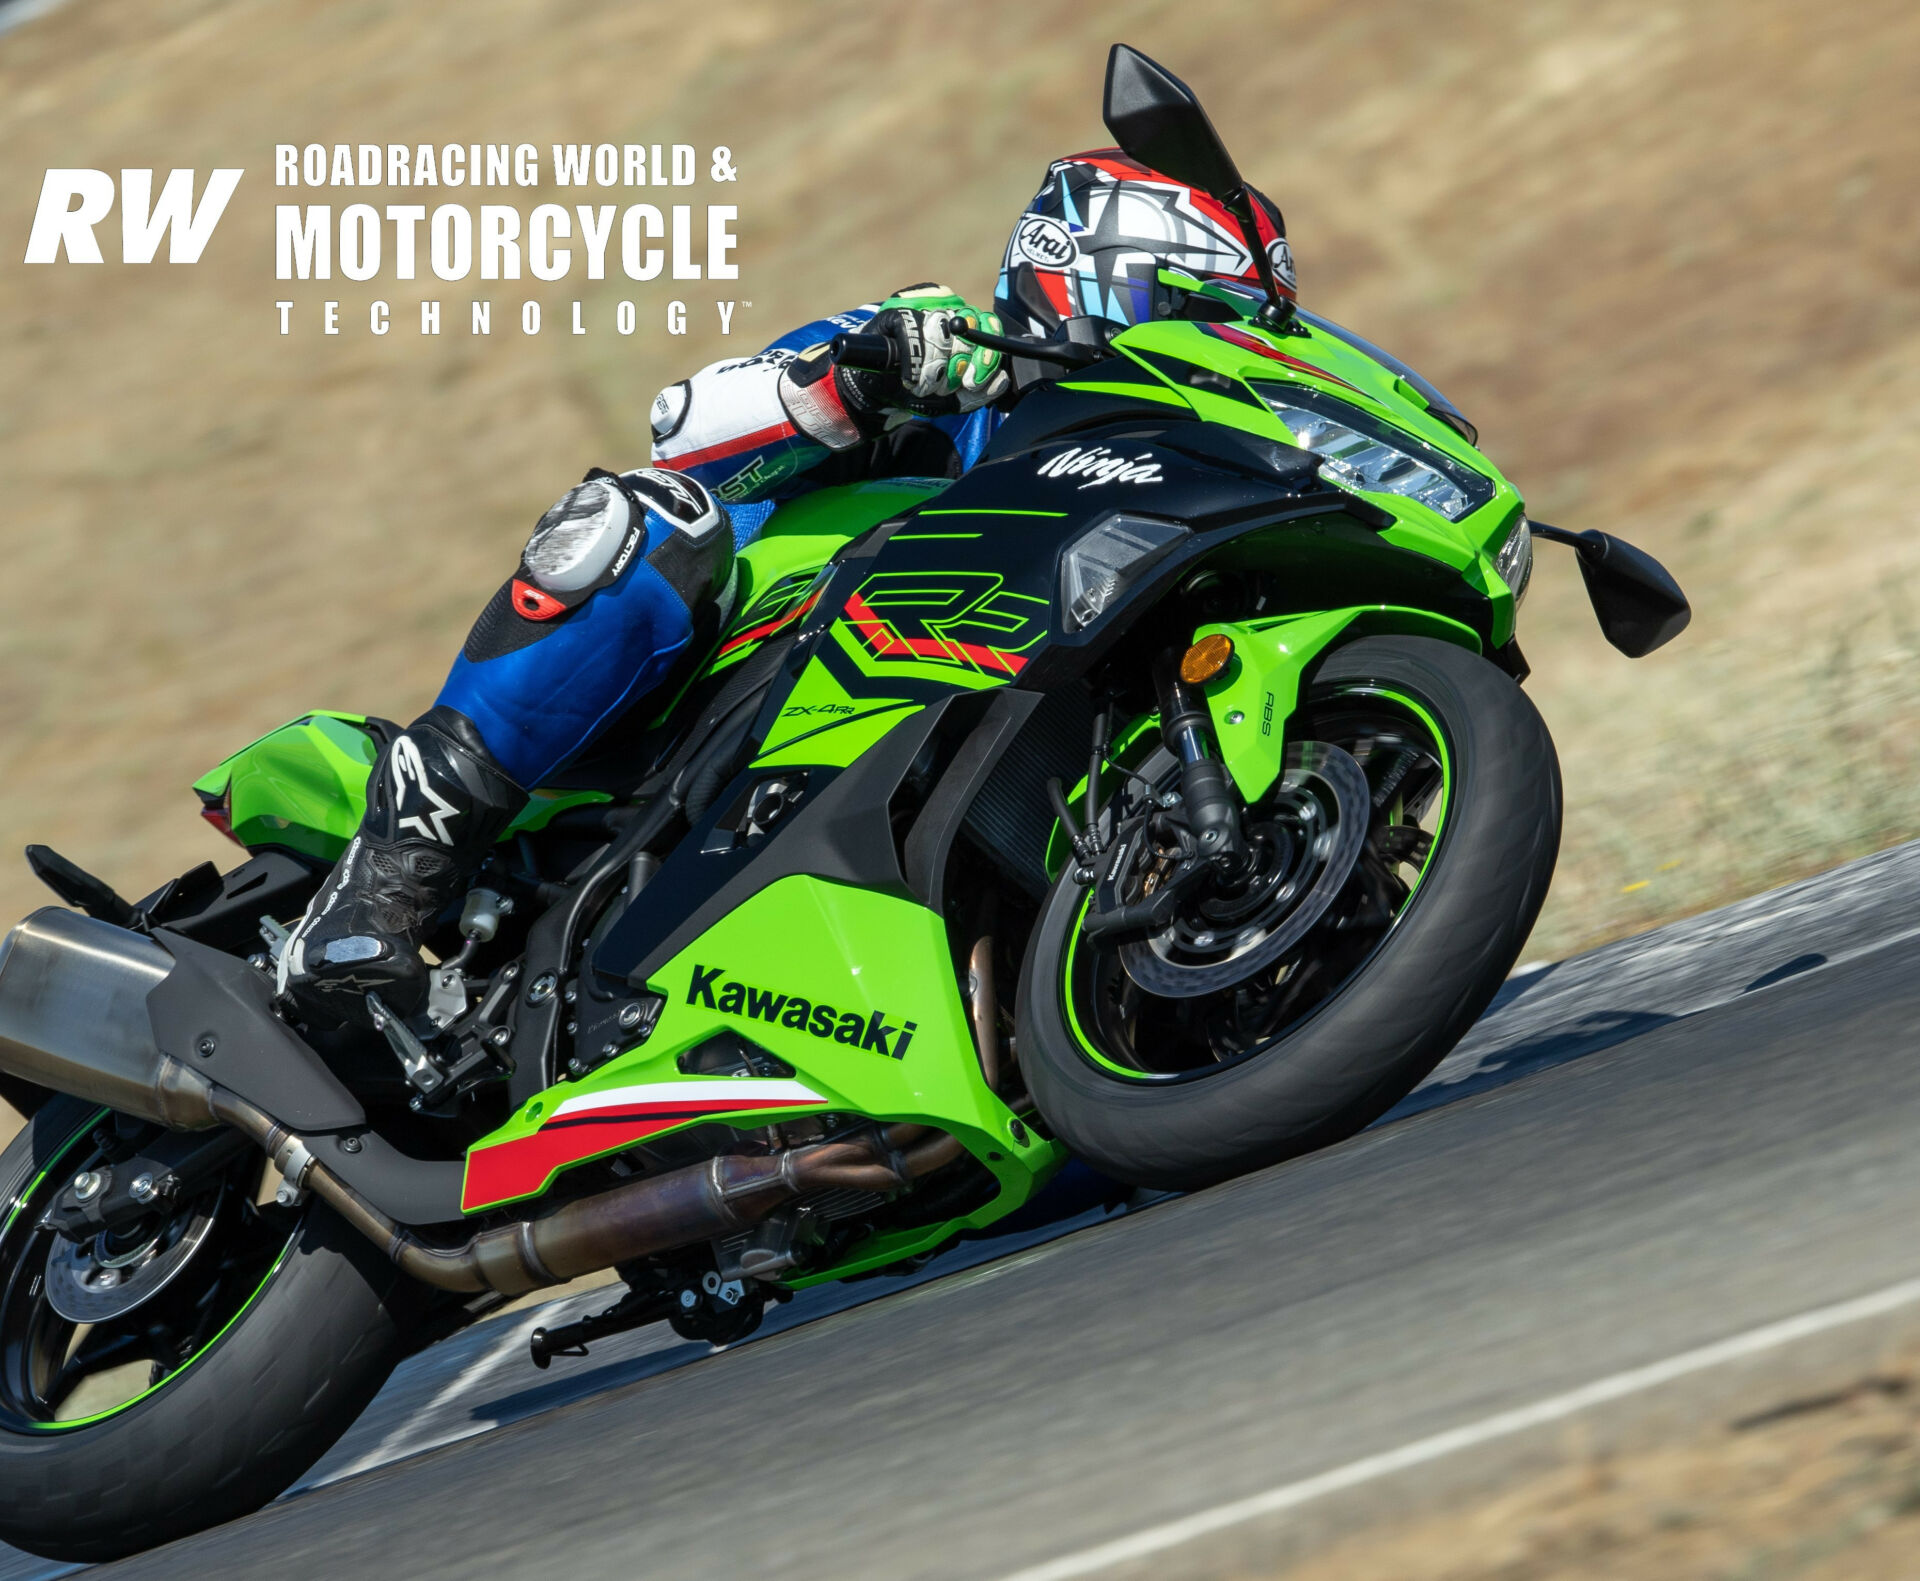 Racing Editor Chris Ulrich has screaming fun riding the all-new 399cc, 4-cylinder, 15,000-rpm 2023 Kawasaki Ninja ZX-4RR at Thunderhill Raceway Park, as seen on the cover of the August 2023 issue of Roadracing World & Motorcycle Technology magazine. Photo by Kevin Wing.